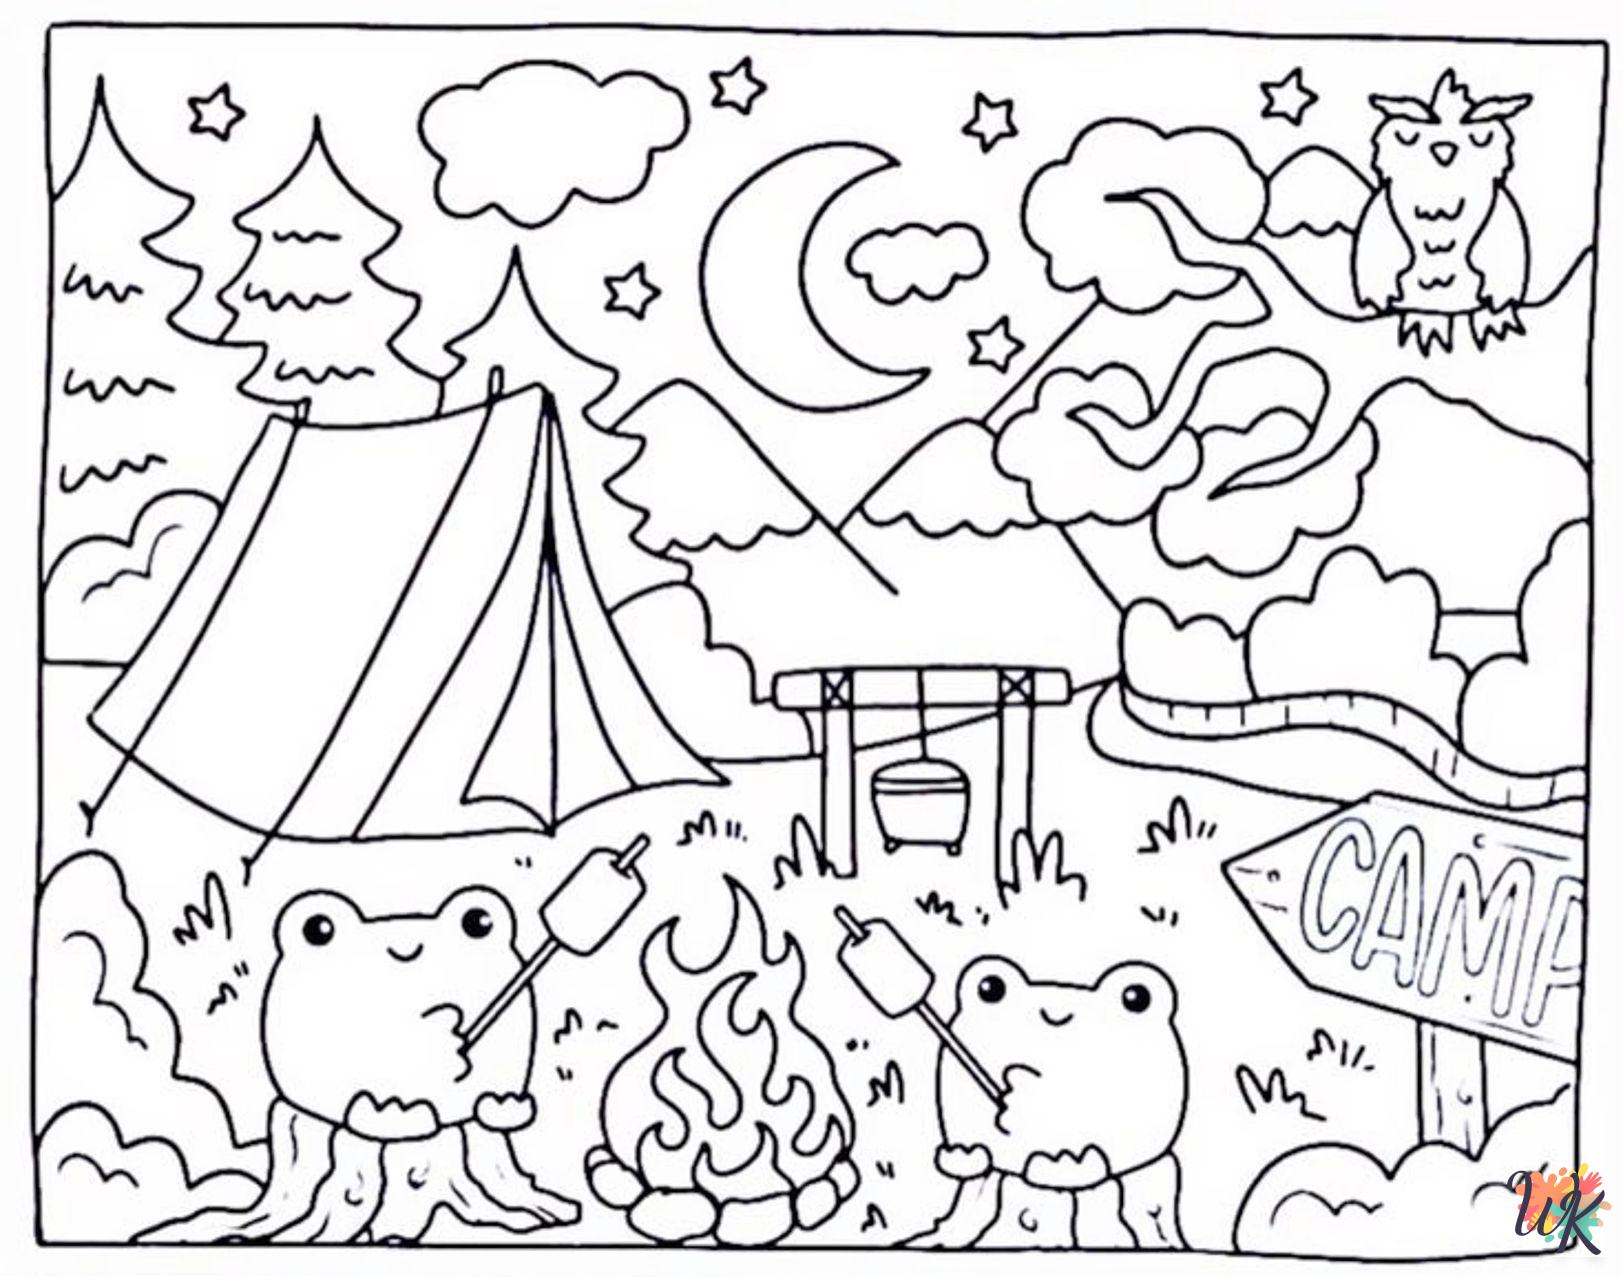 Bobbie Goods coloring pages for preschoolers